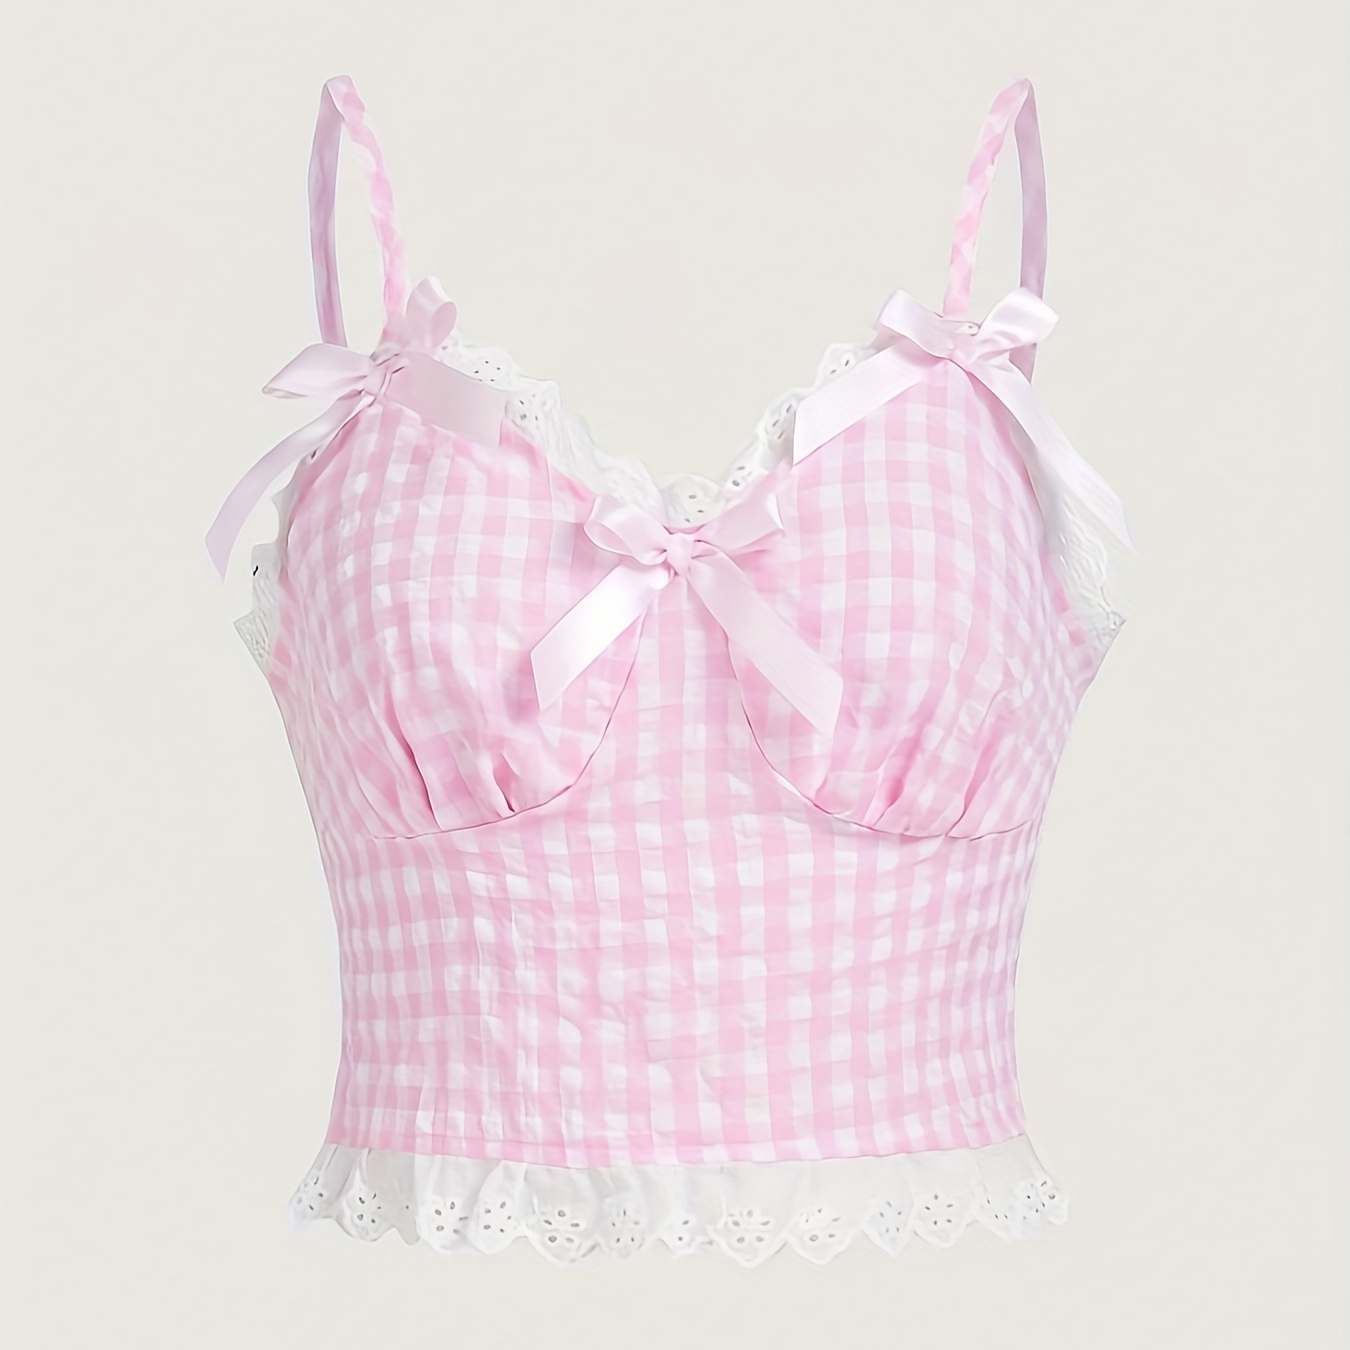 

Girls' Fashion Checkered Camisole Top With Lace Trim And Bow Accents, Non-stretch, Adjustable Tie Straps, Casual Style Summer Tank